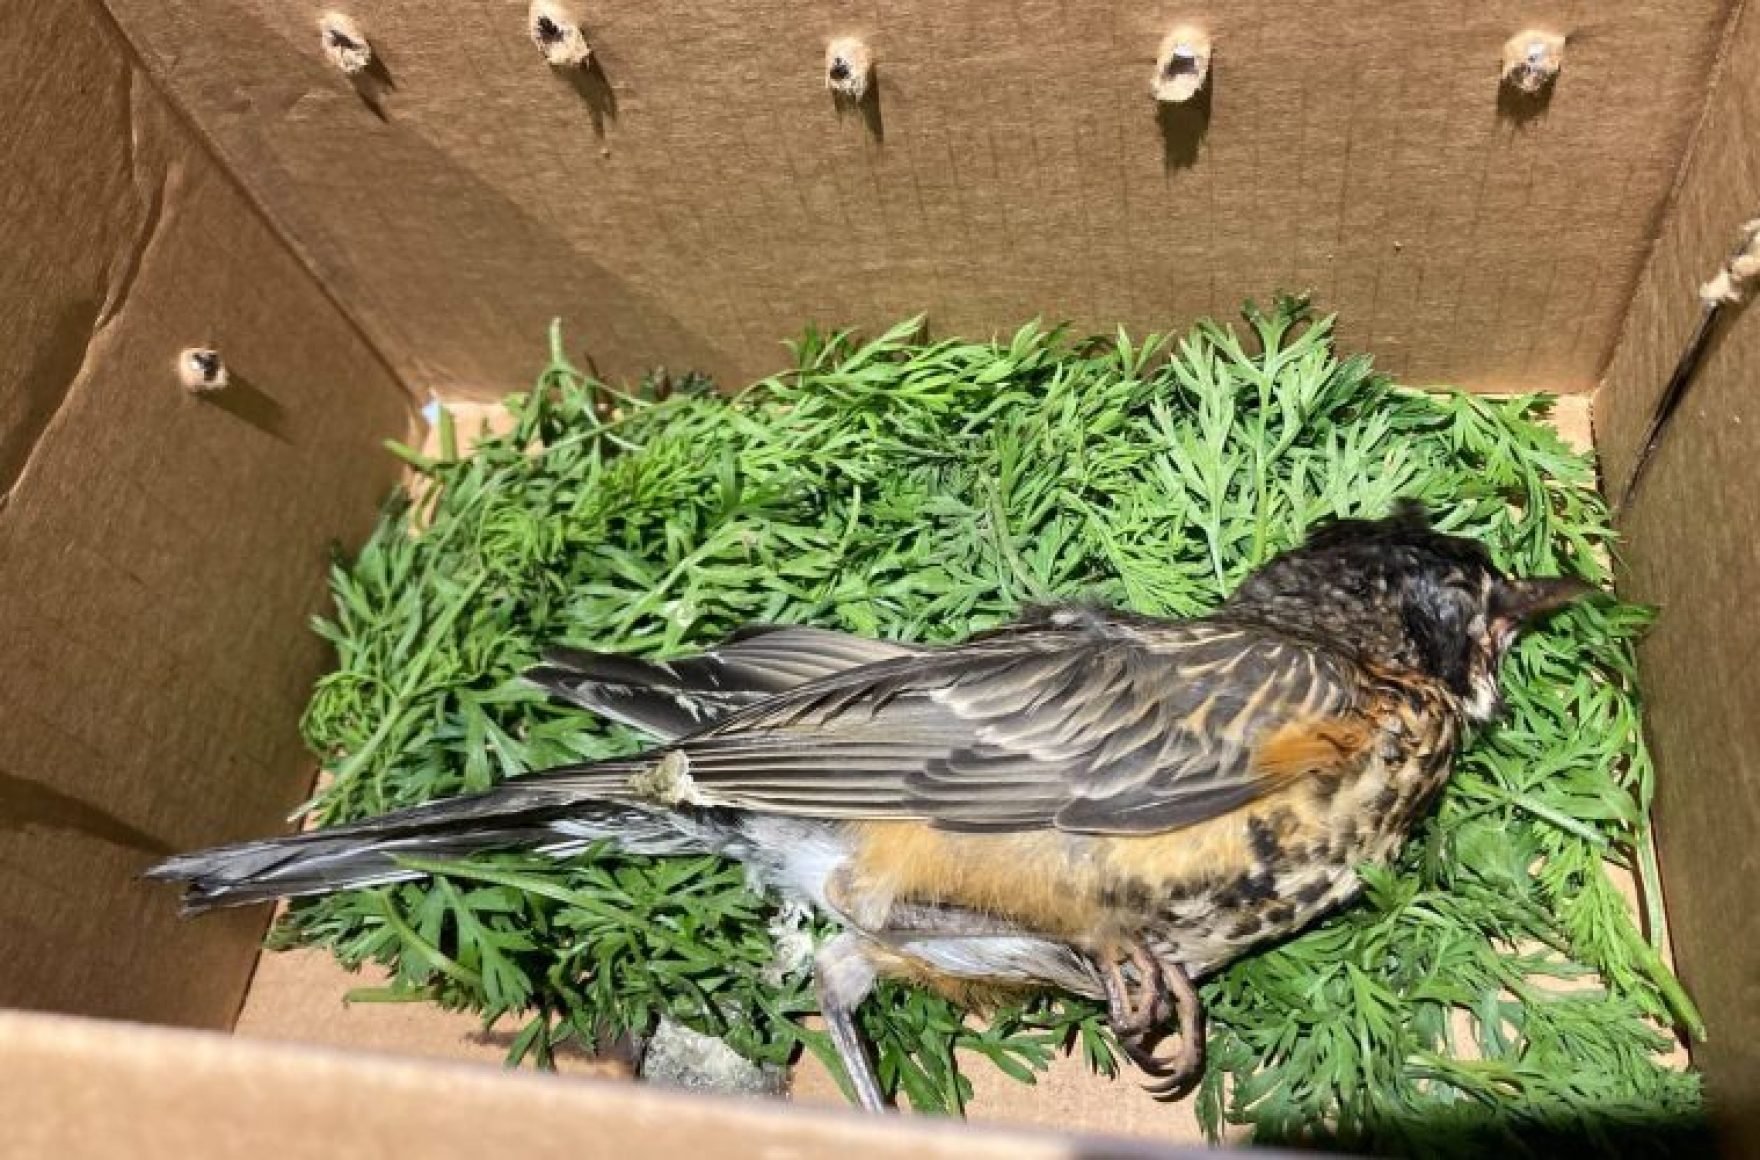 a dead bird which suffered from an eye neurological disease lies dead in a cardboard box with some green foliage under it